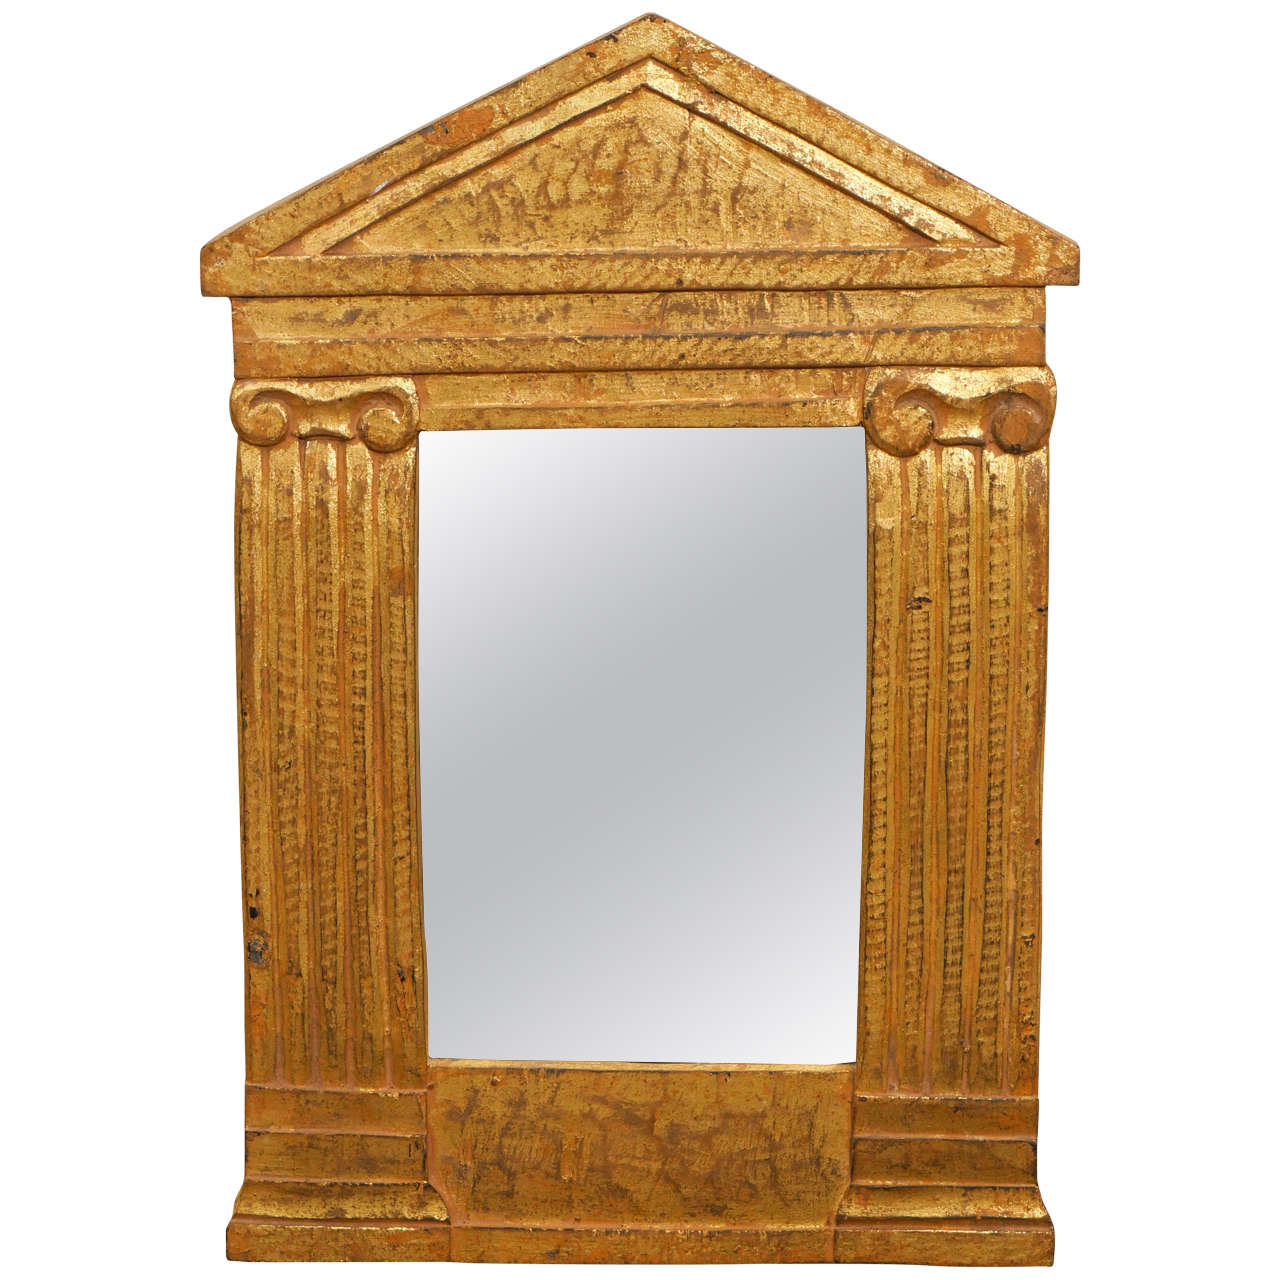 A Small Giltwood Mirror